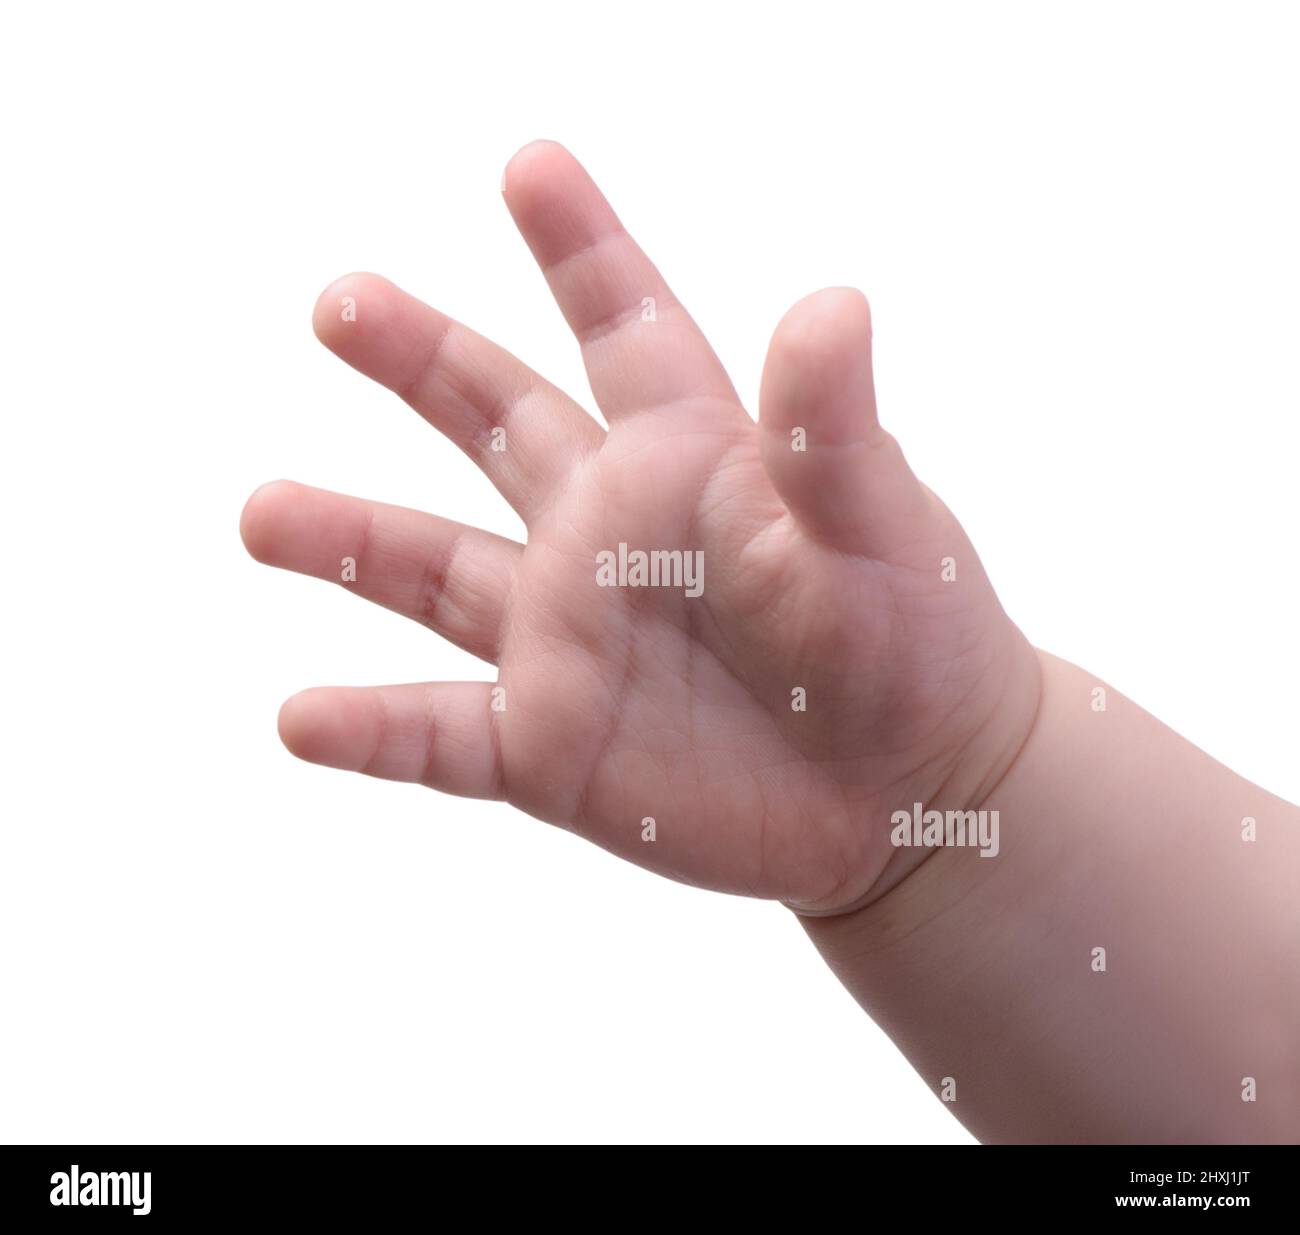 Small baby hand isolated on white background Stock Photo